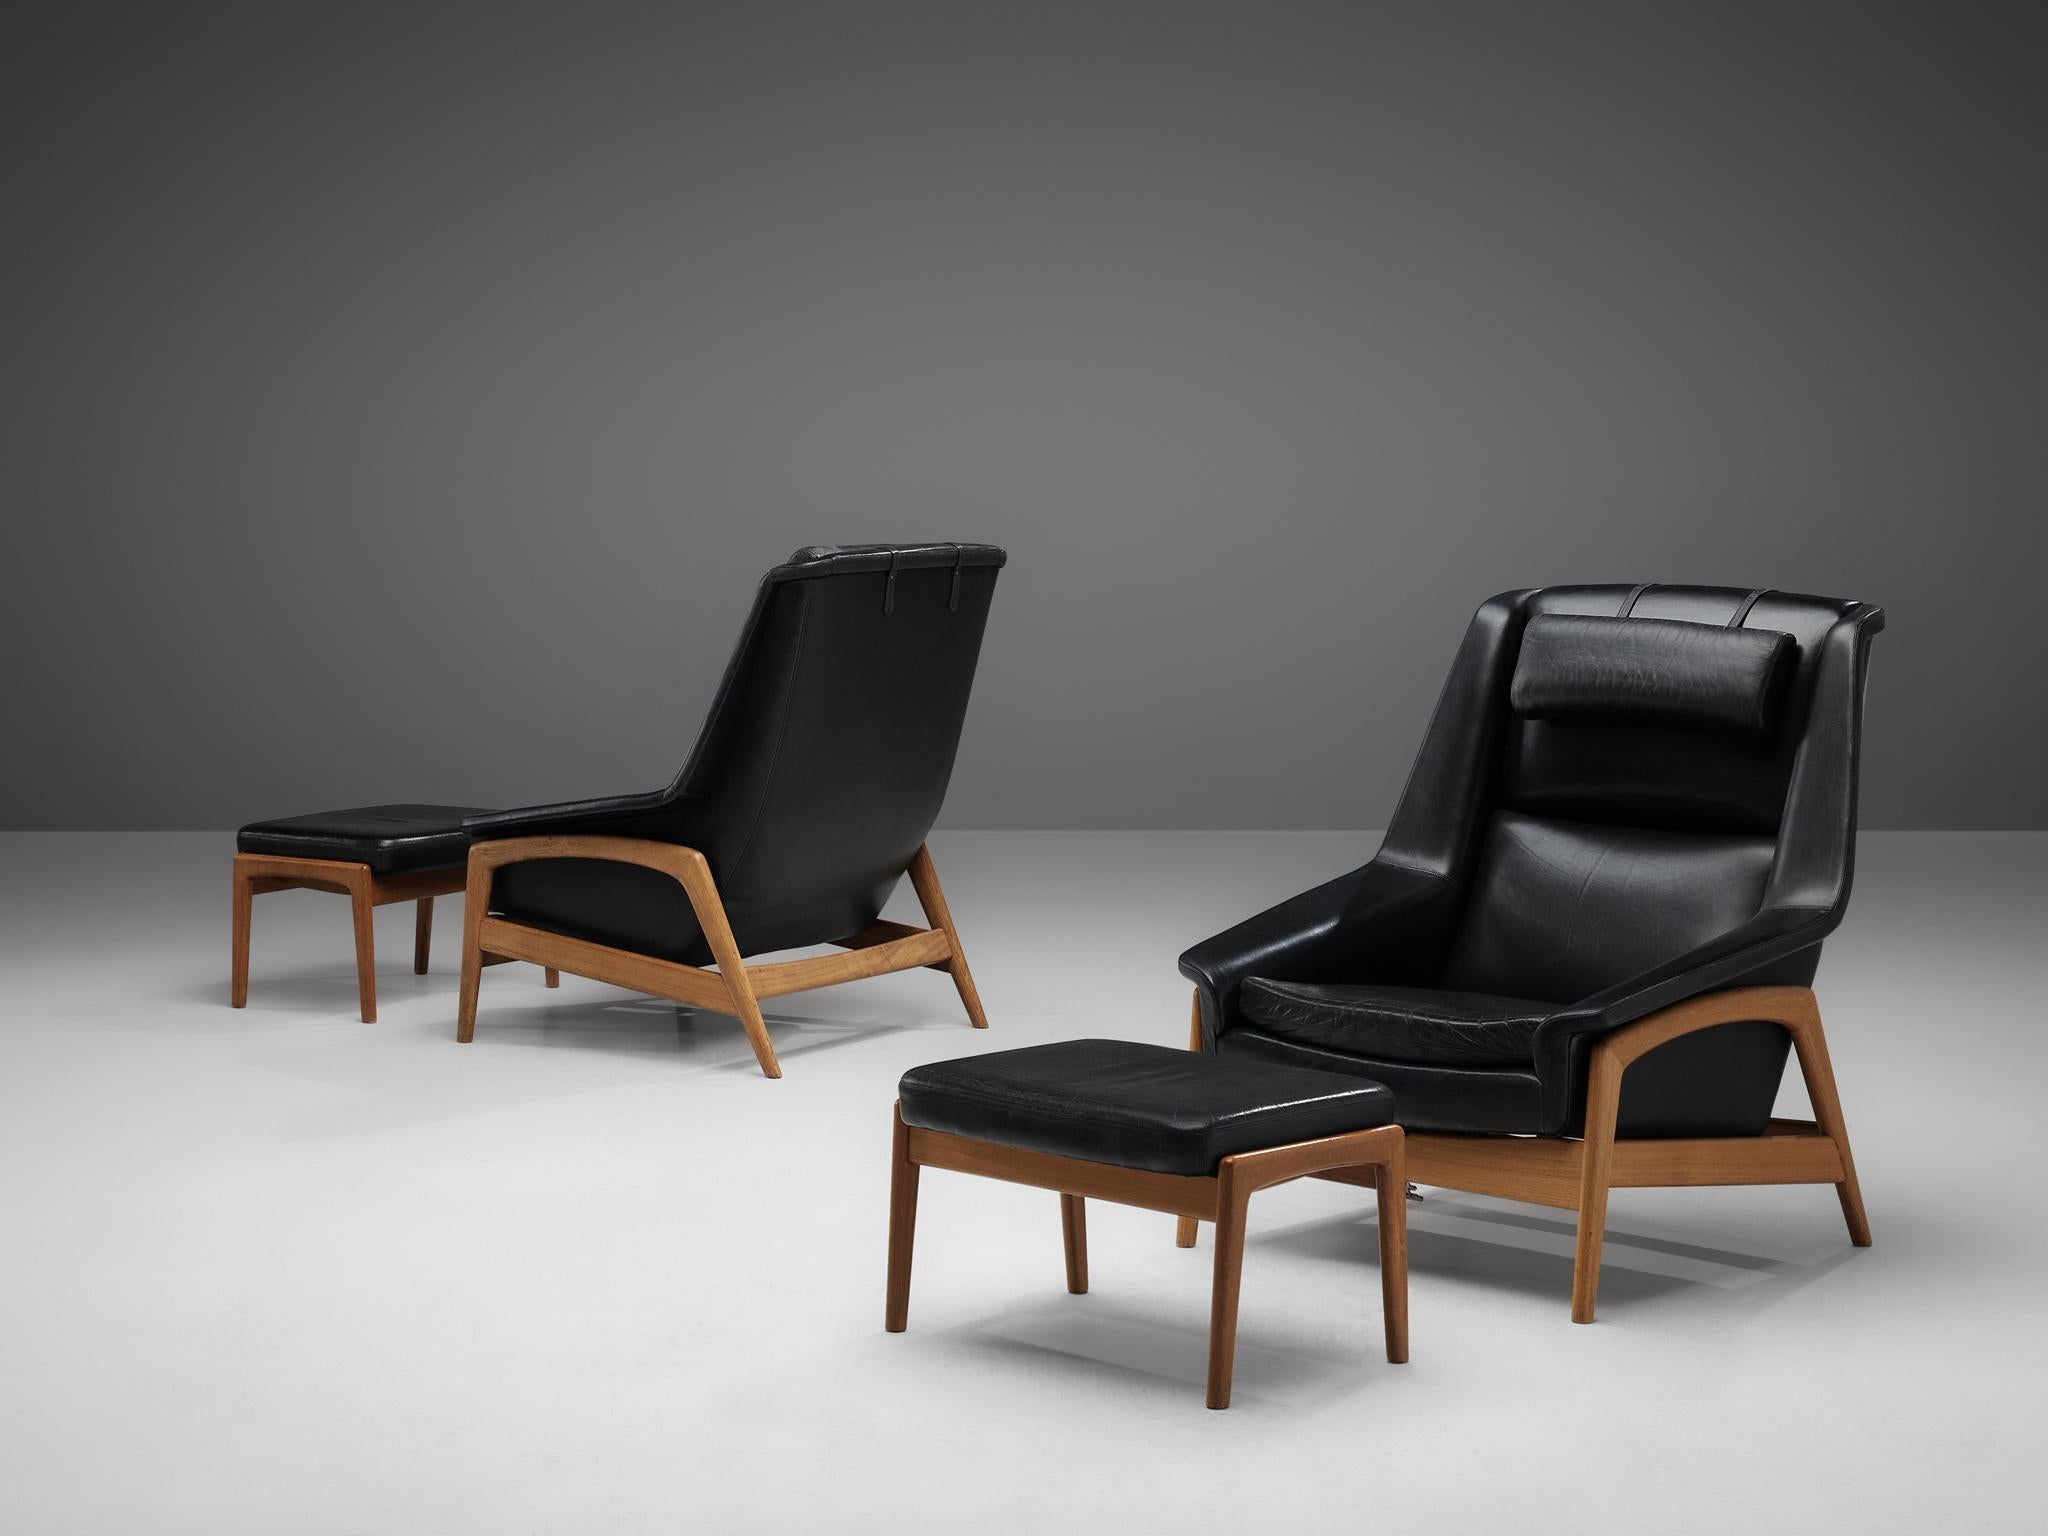 Folke Ohlsson for DUX, pair of lounge chairs, model 'Profil' with ottoman, black leather, oak, Sweden, 1960s

Pair of lounge chairs with ottomans, designed by Folke Ohlsson for DUX. On a bright oakwooden frame sits the bulky seating in black